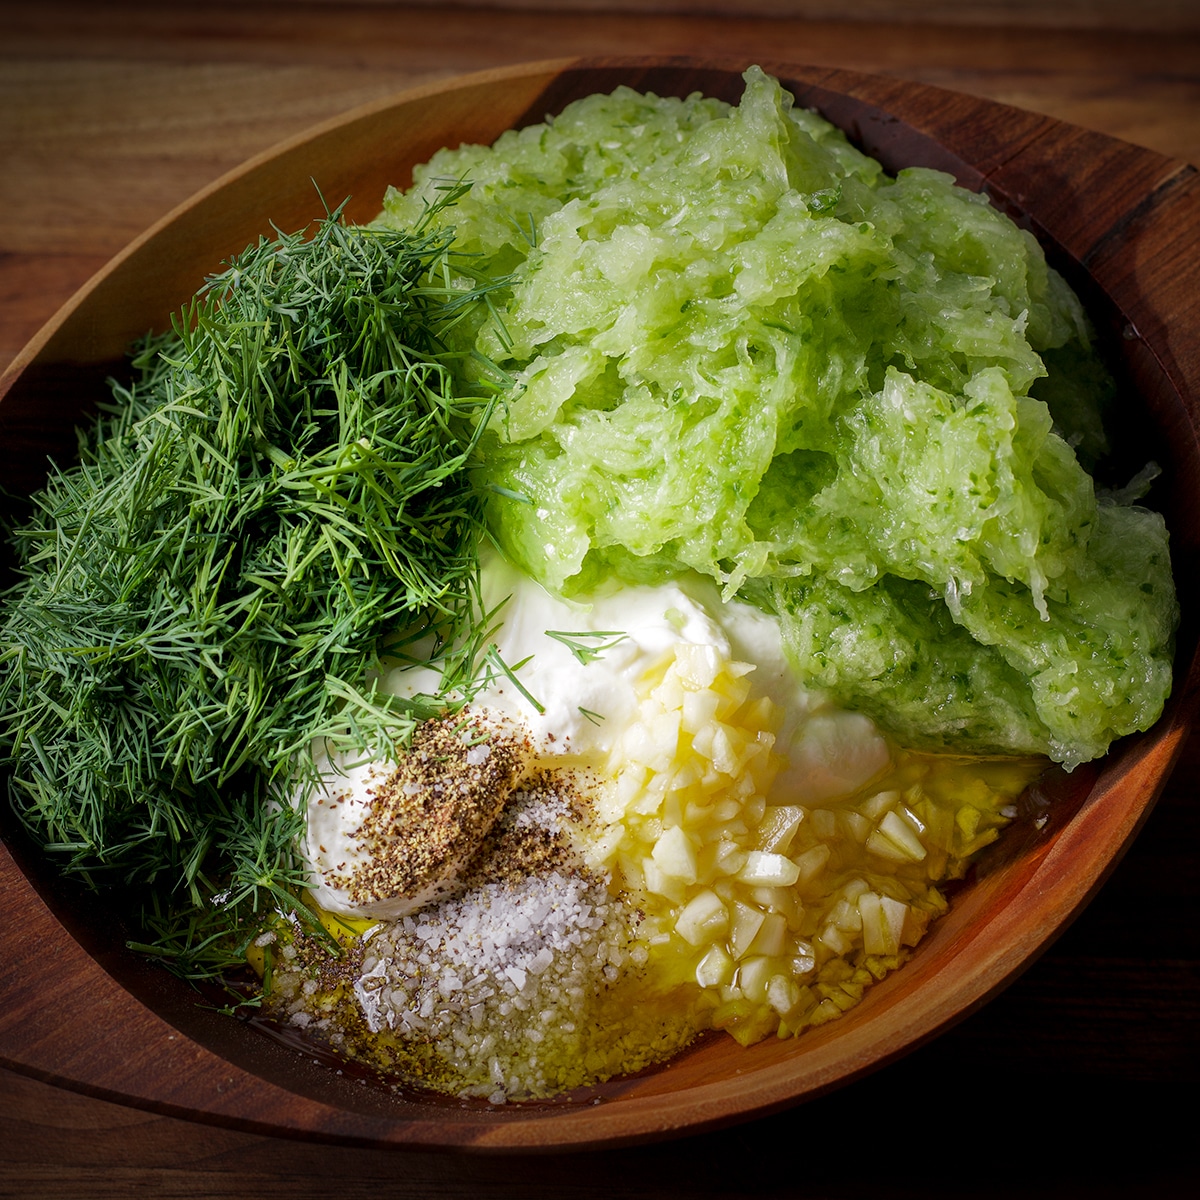 A wood bowl containing all the ingredients to make tzatziki sauce before the sauce is mixed.